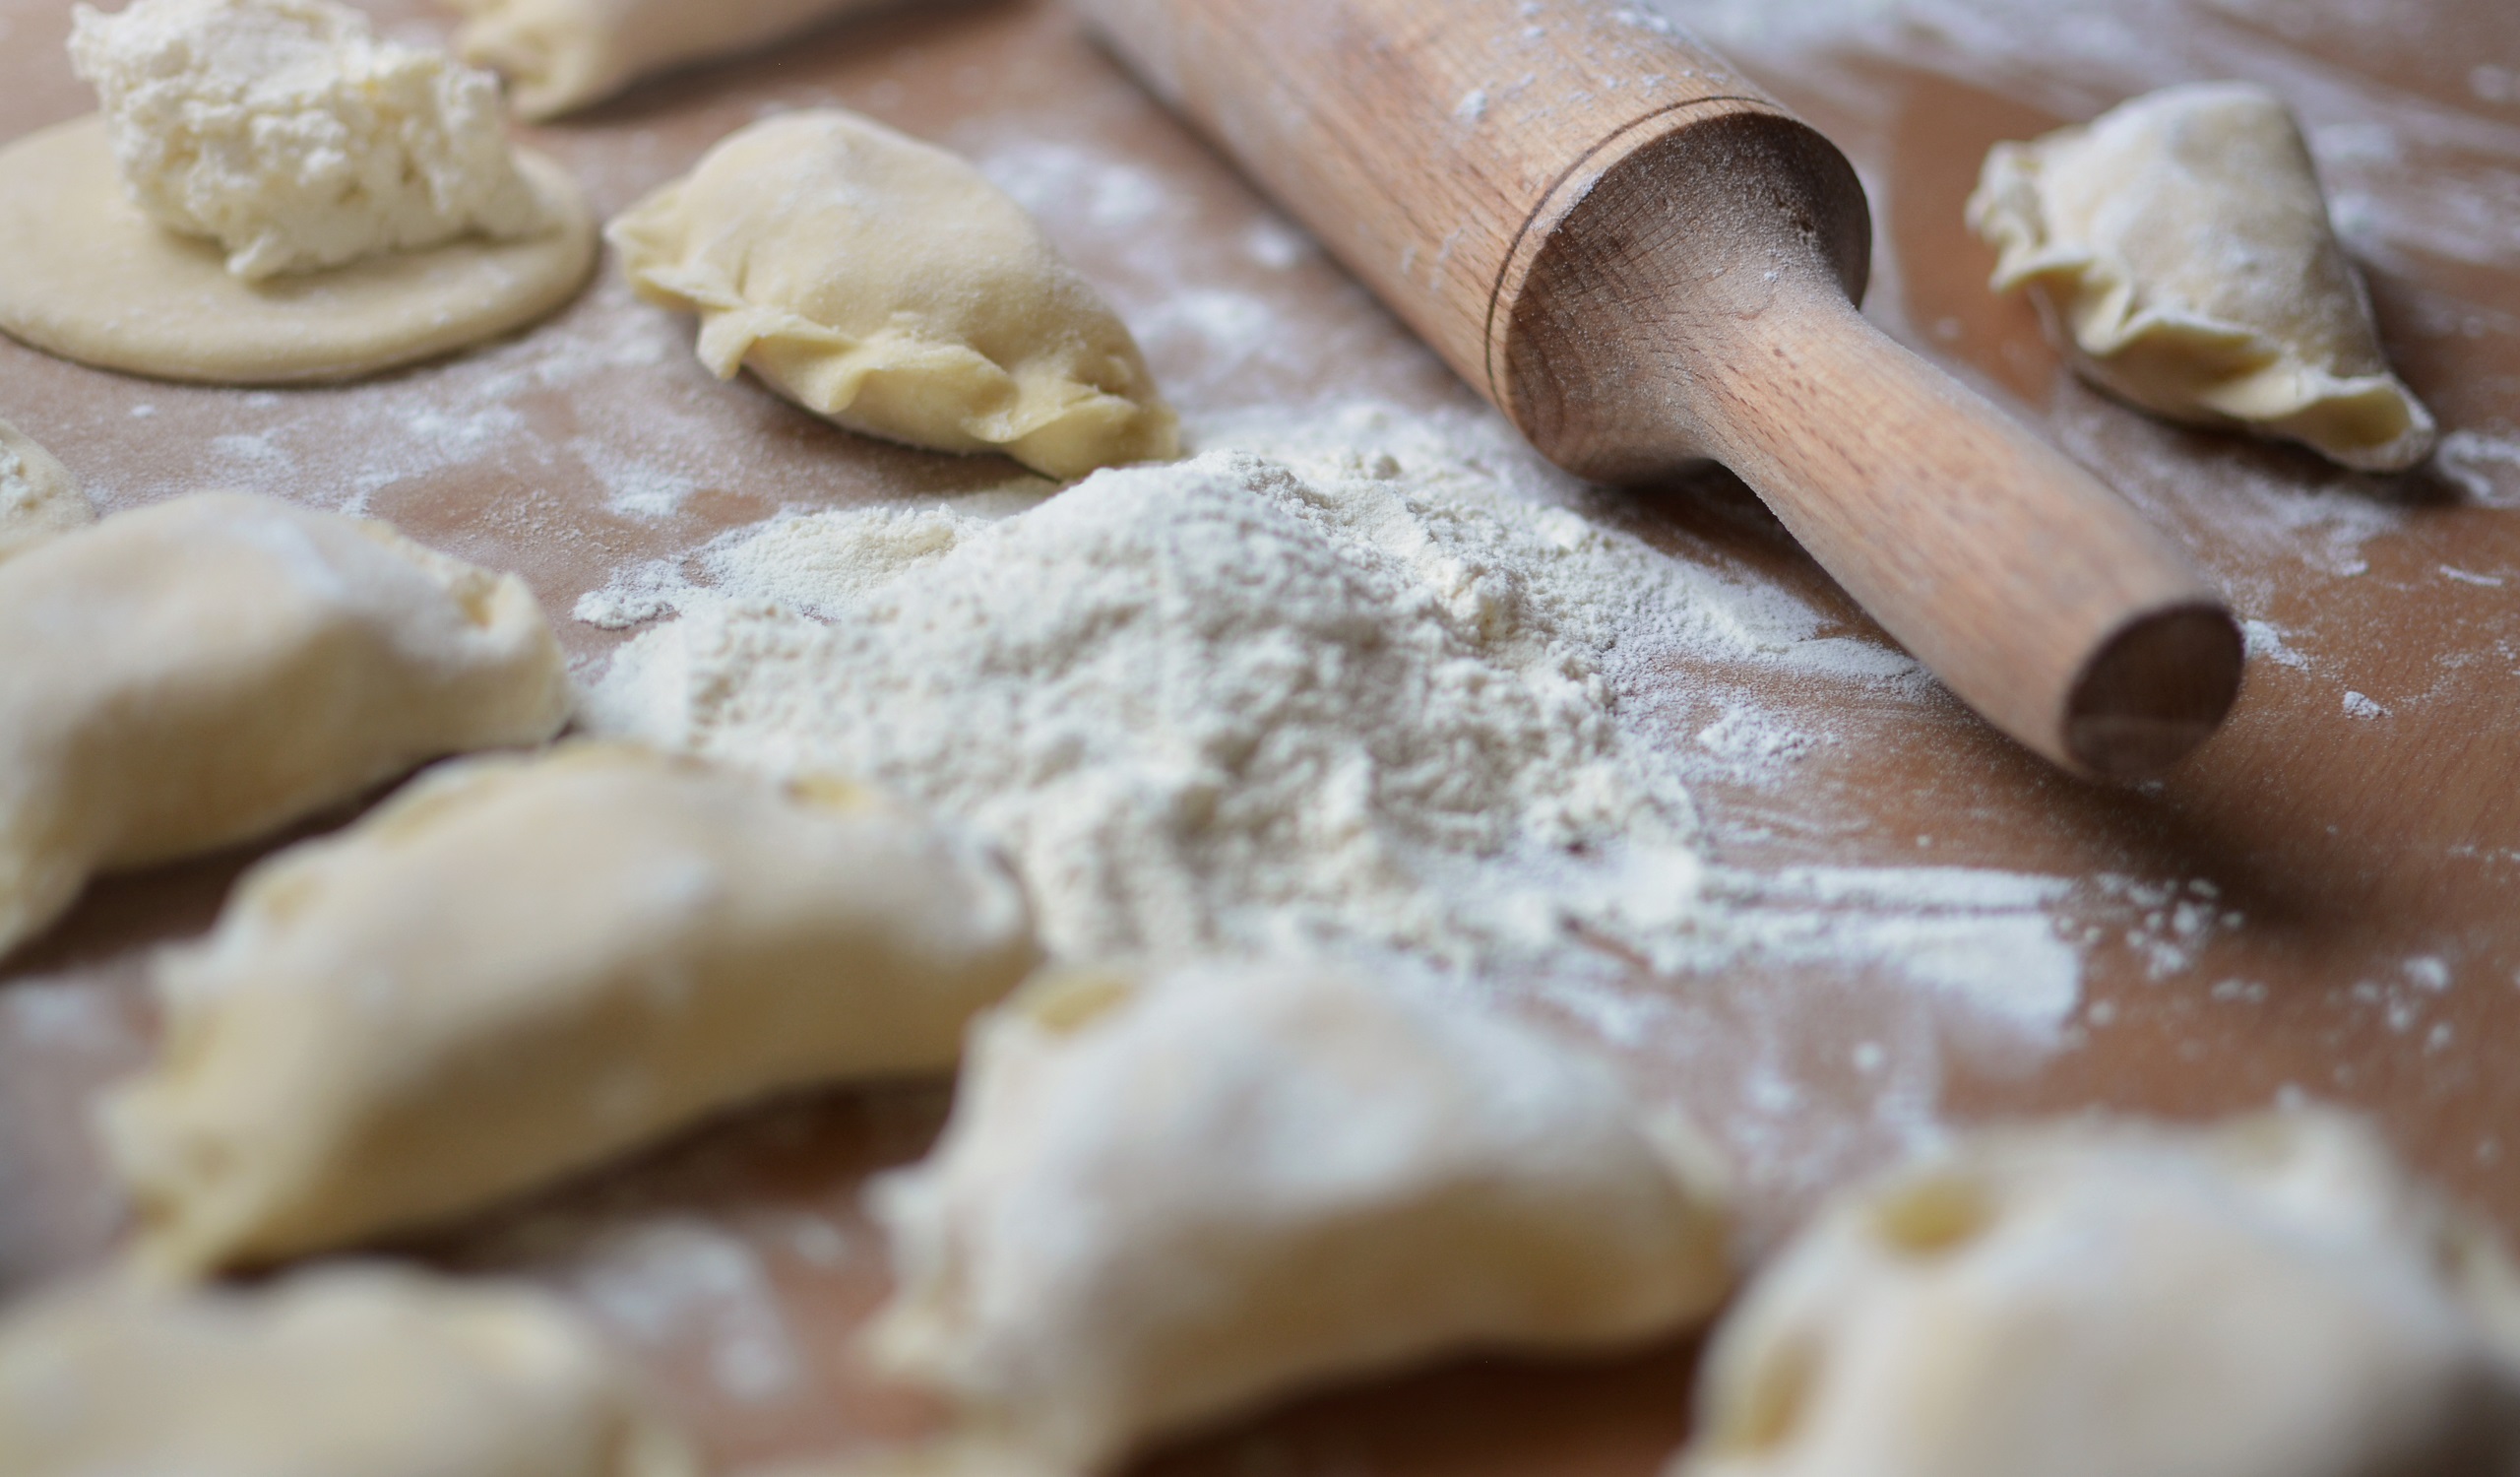 Different steps in the process of making pierogies from a small pile of flour, a small flat pierogi dough having a pinch of filling at its center, several finished raw pierogies, and a wooden rolling pin.